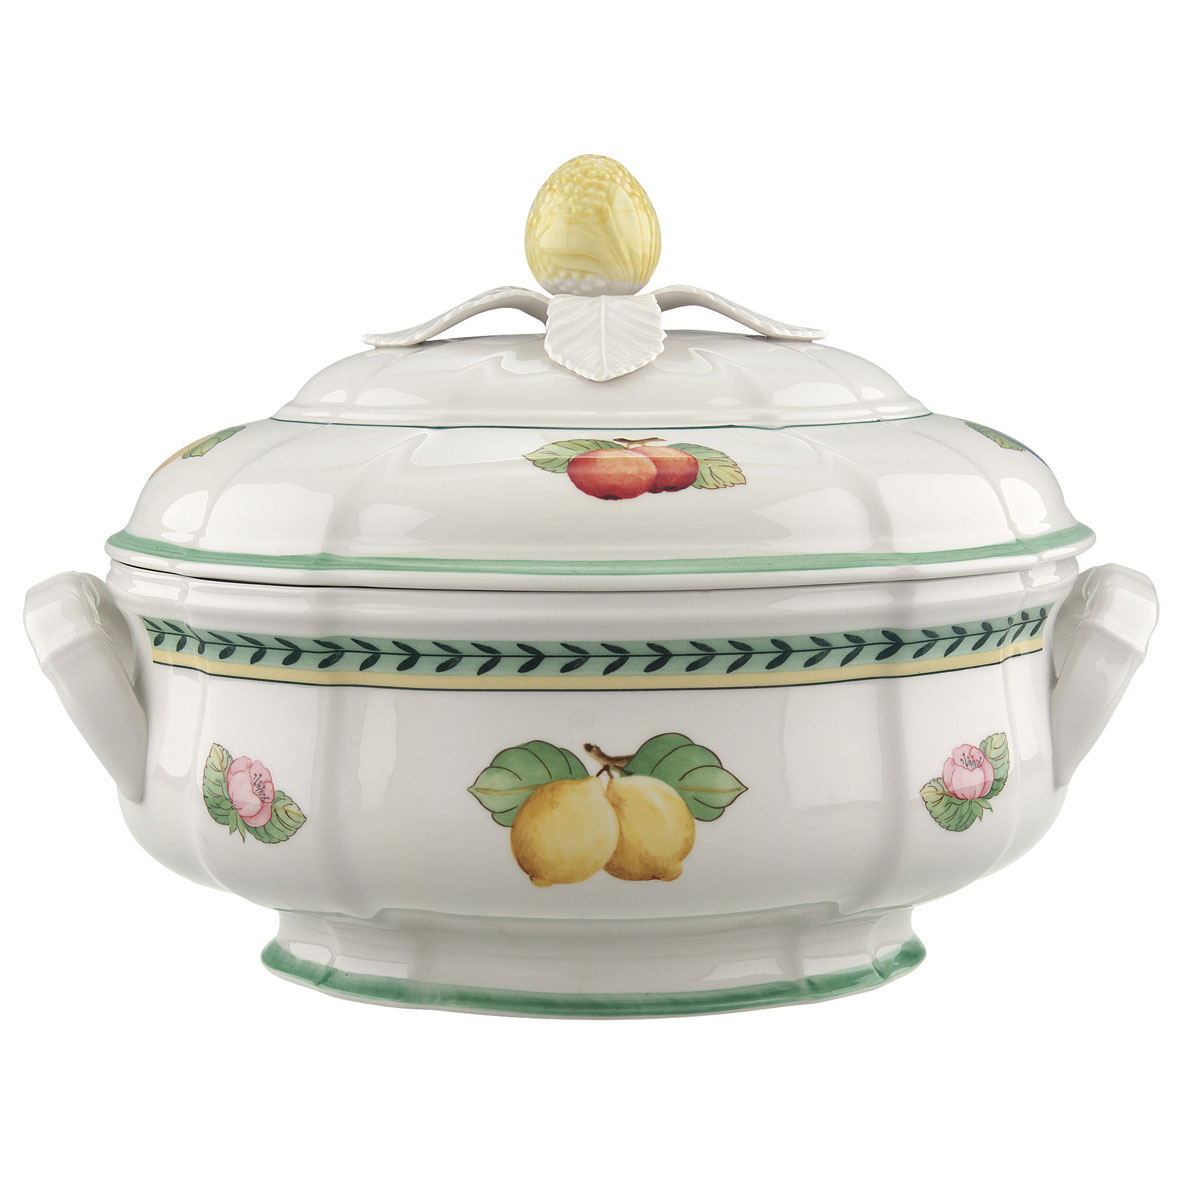 Villeroy and Boch French Garden Fleurence Soup Tureen